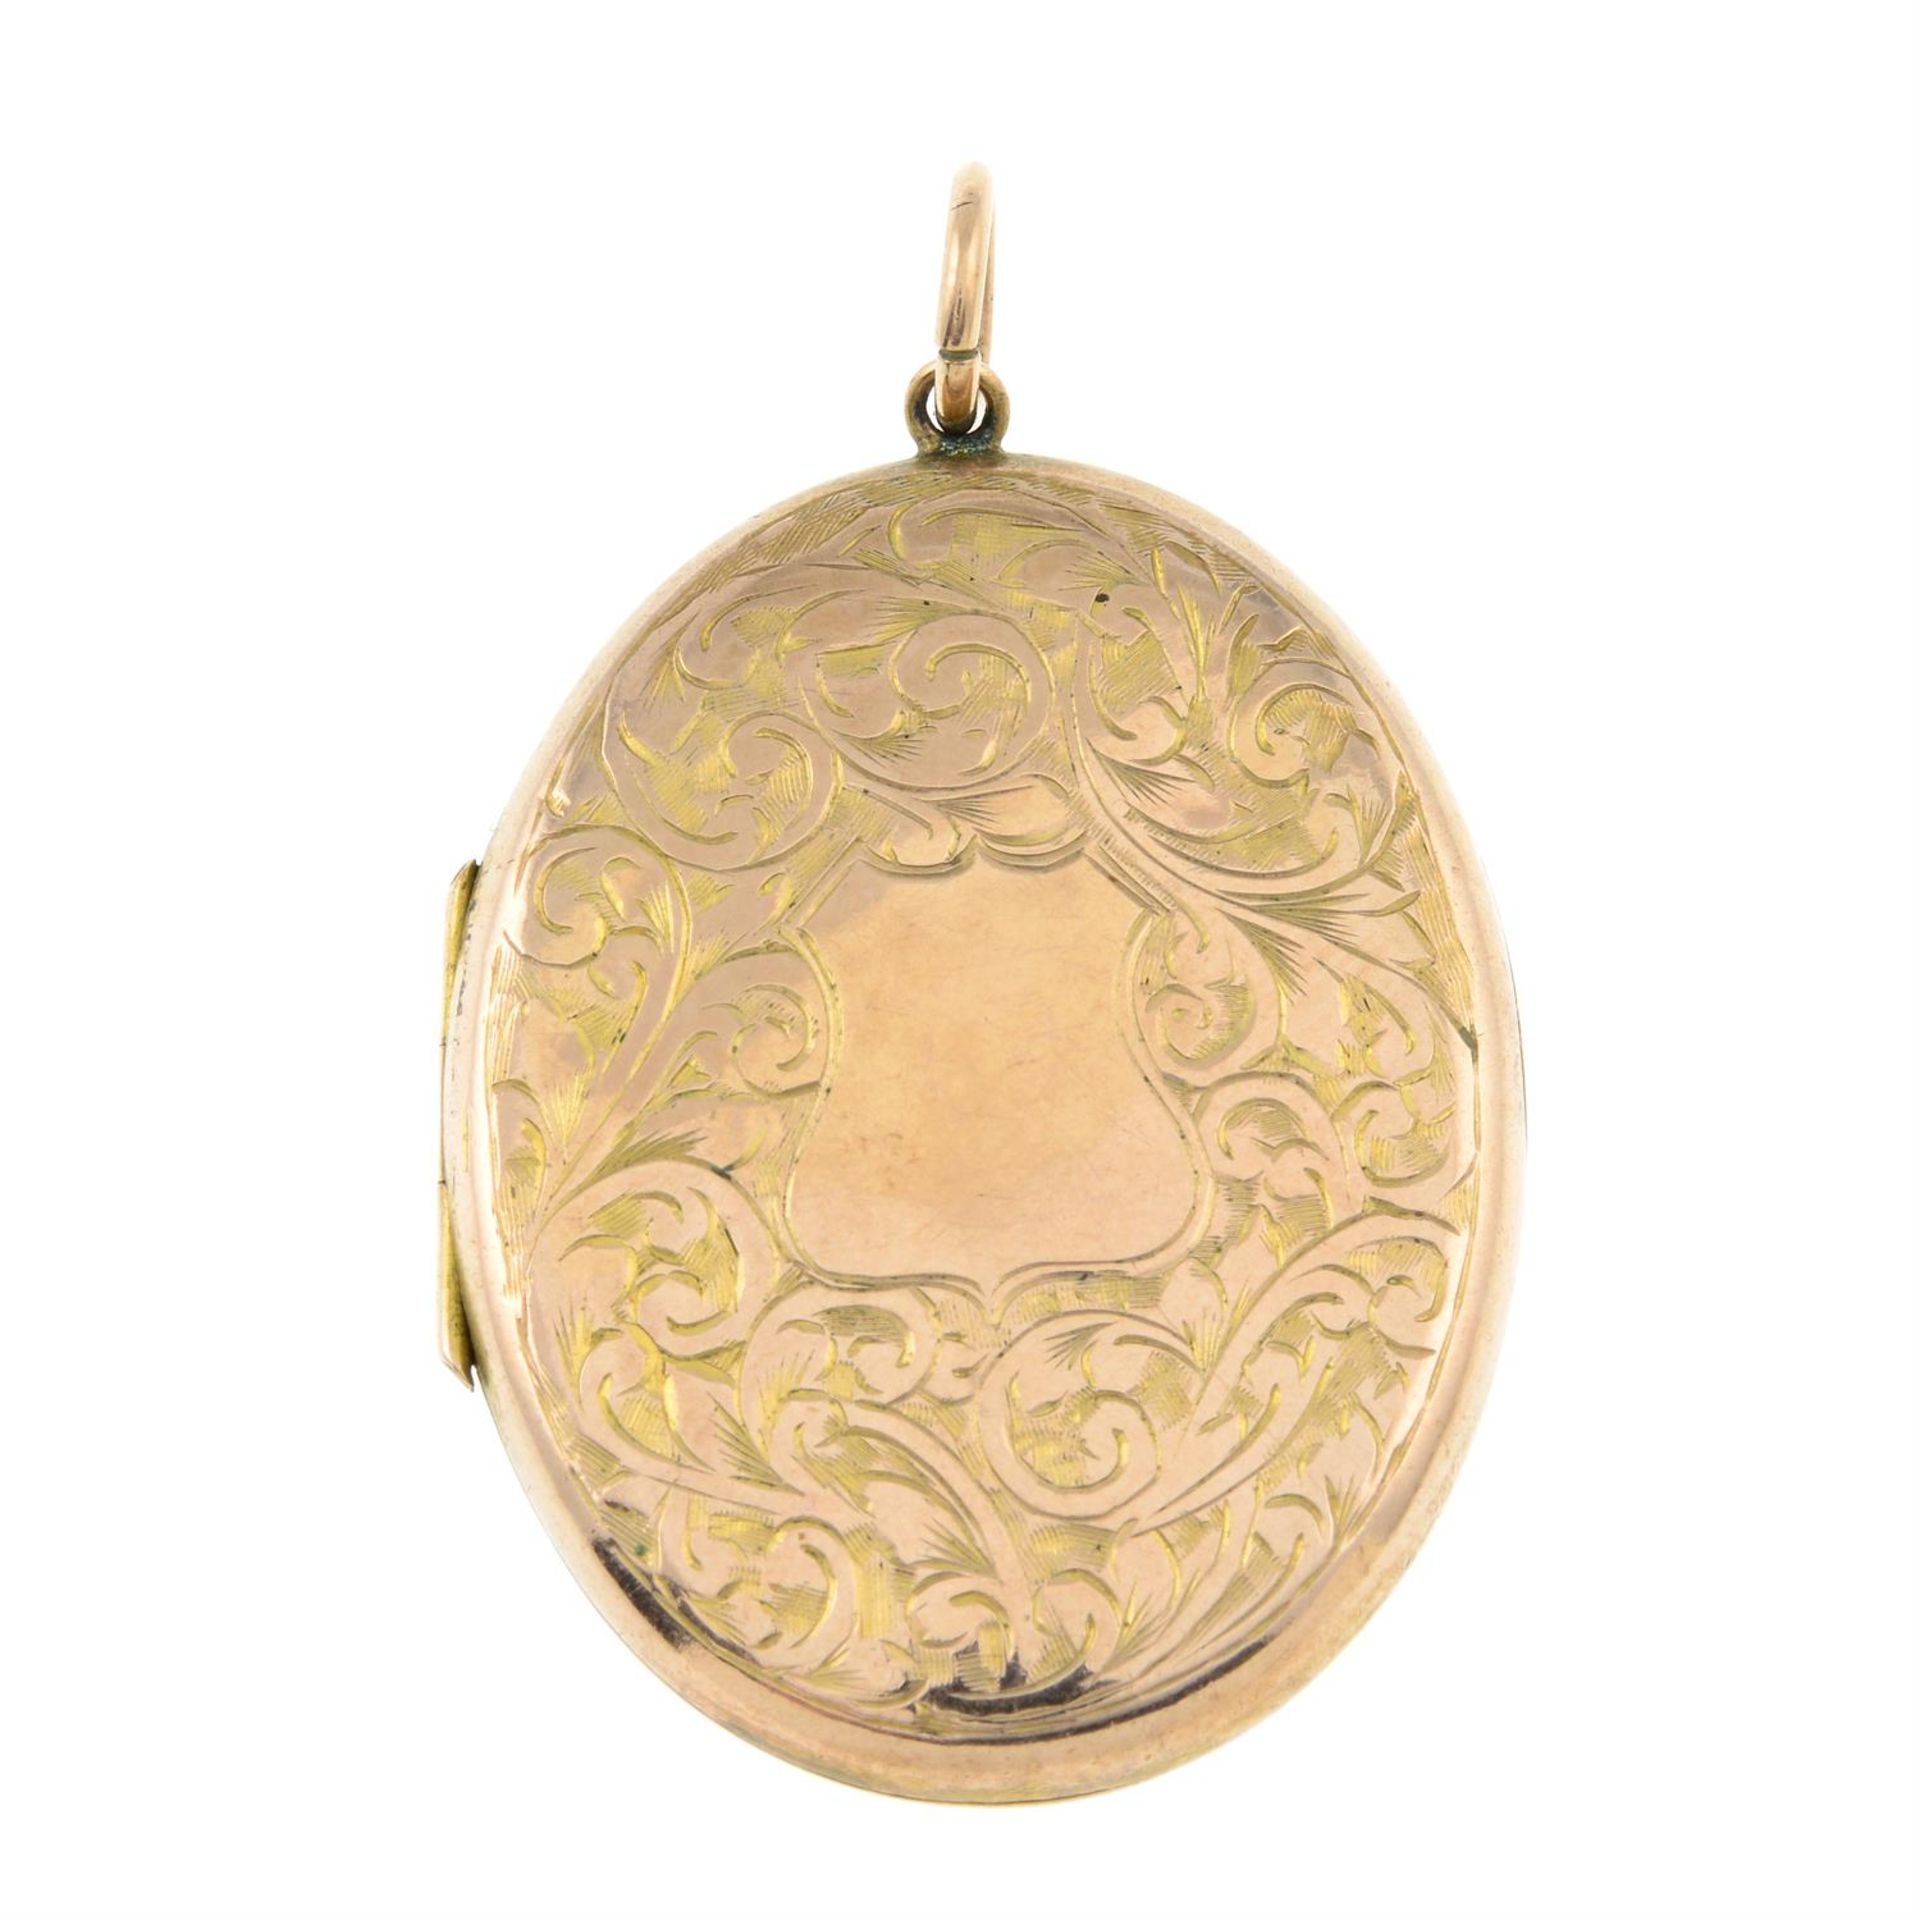 An early 20th century 9ct gold front&back engraved foliate locket.